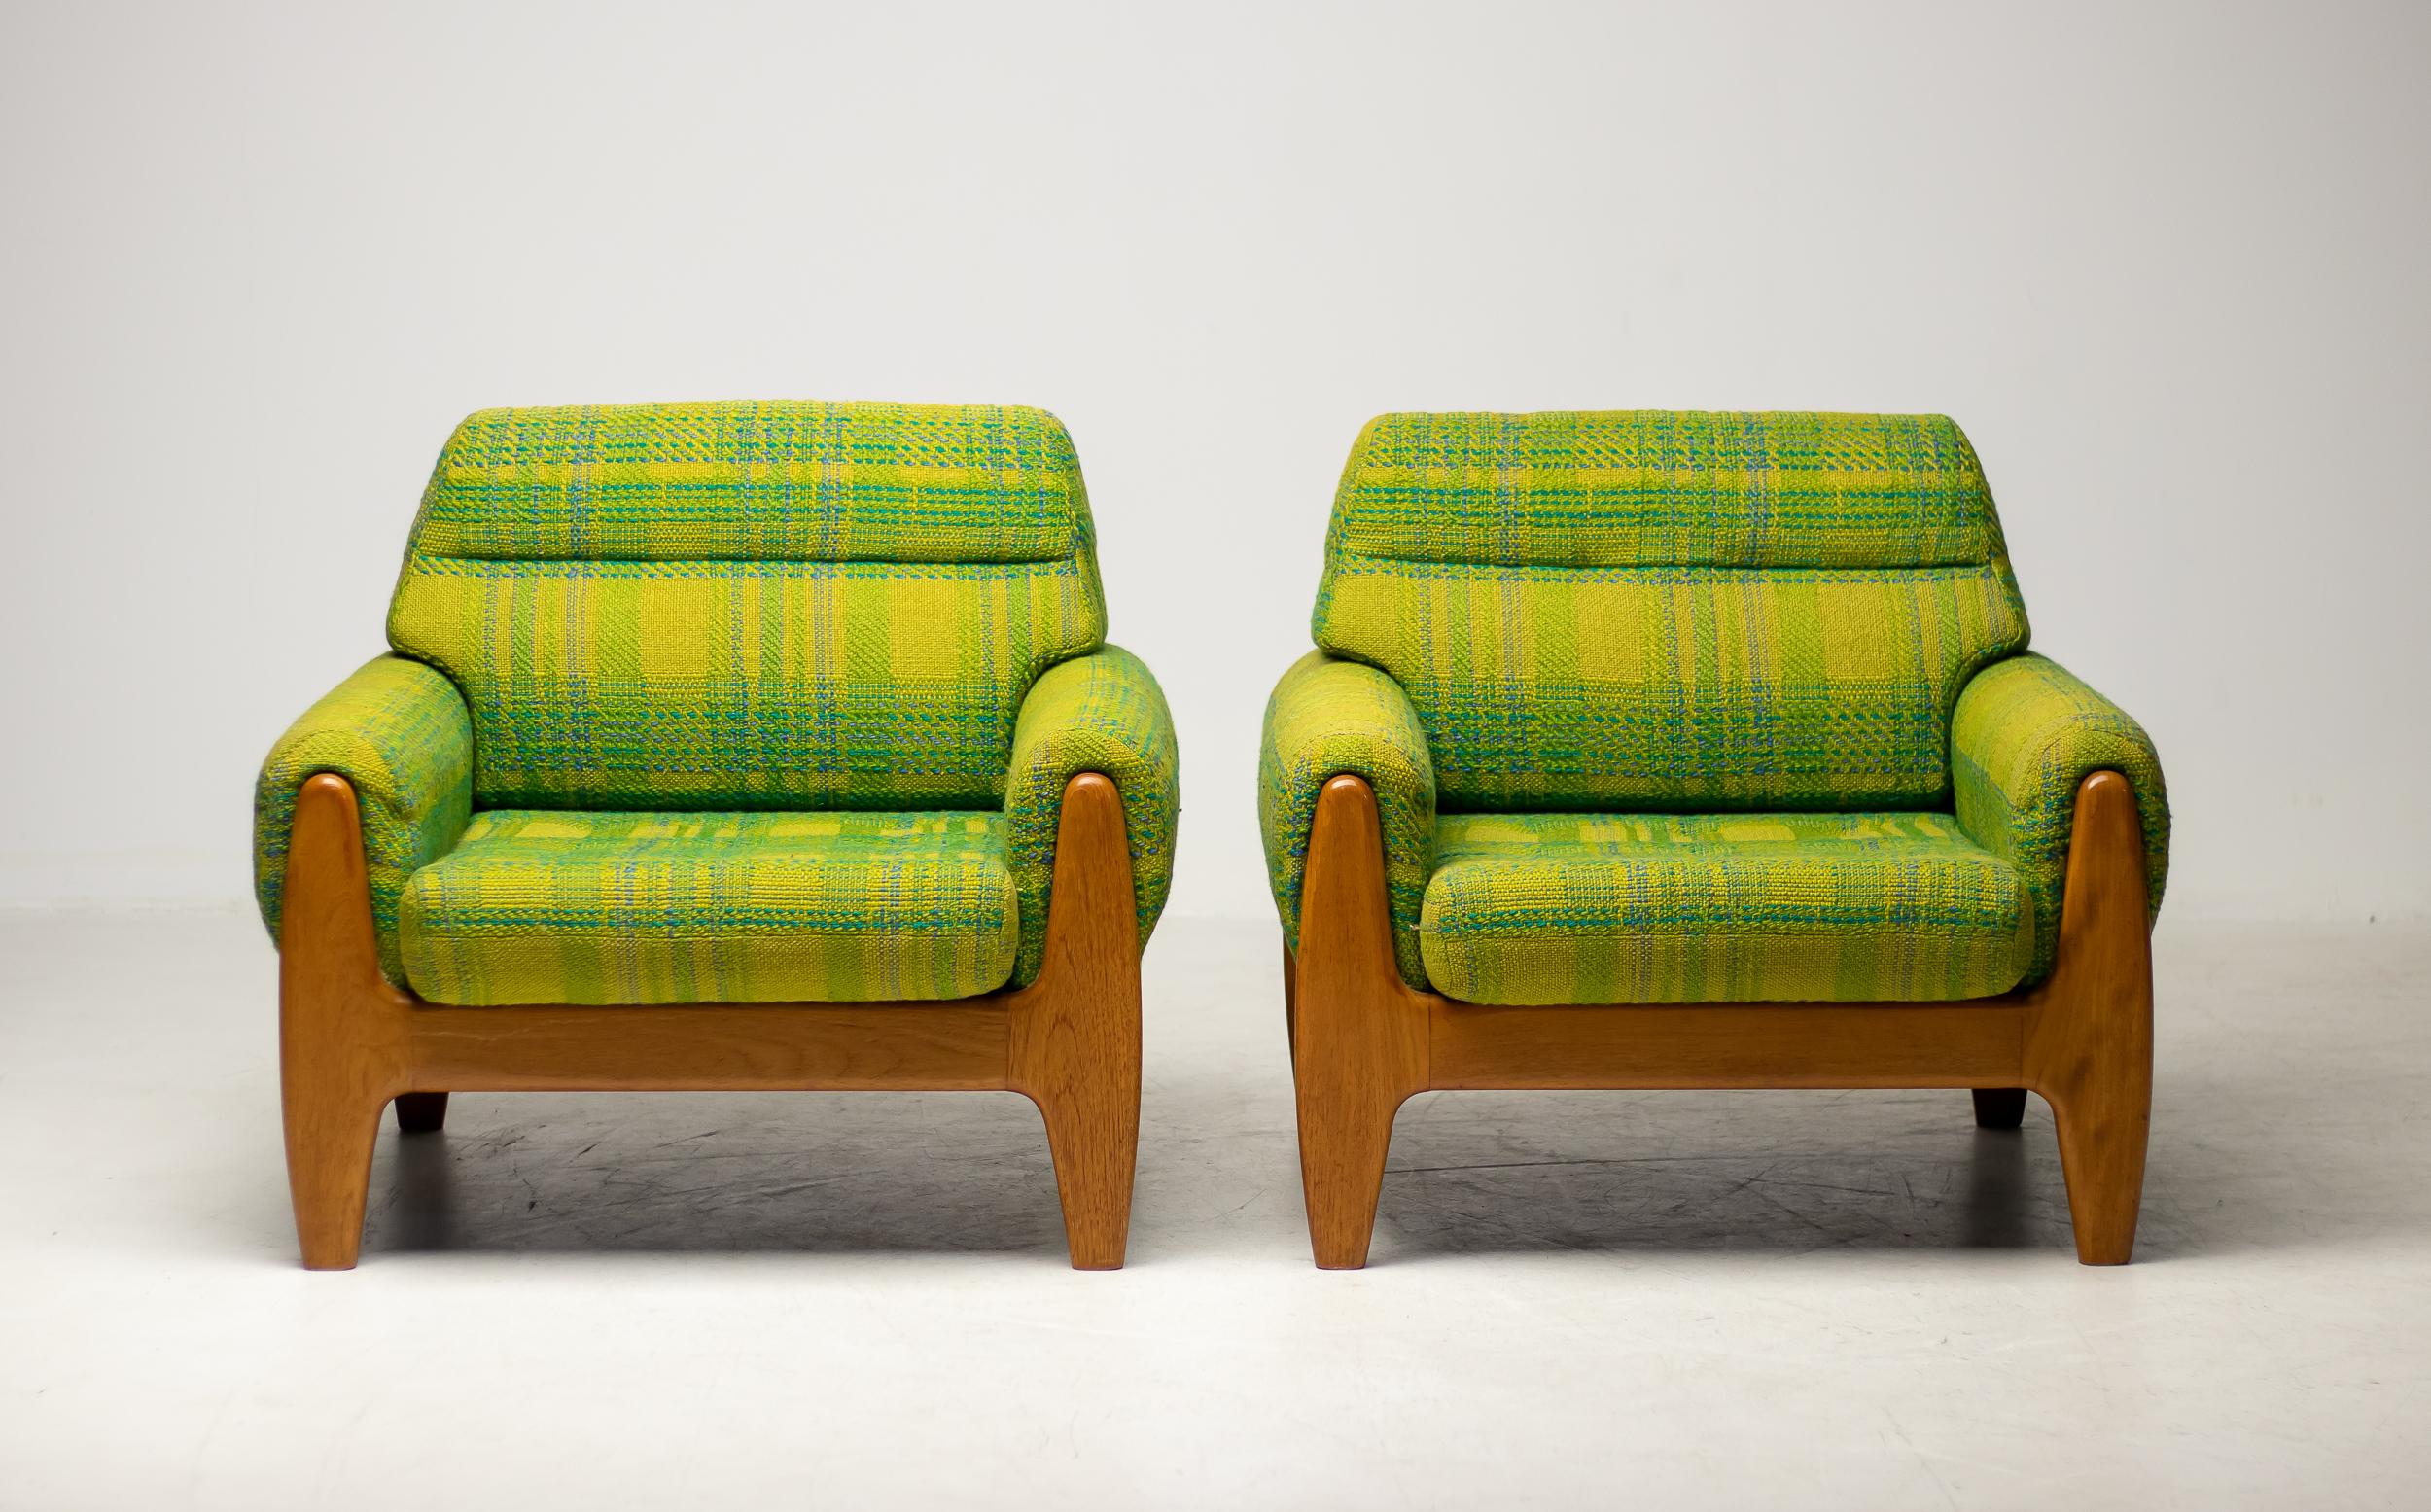 Beautiful and rare pair of lounge chairs by Illum Wikkelsø in teak and original green wool upholstery.
The upholstery is still in remarkable condition.
Priced as a set.

Illum Wikkelsø was born in 1919 in Denmark. After training as a